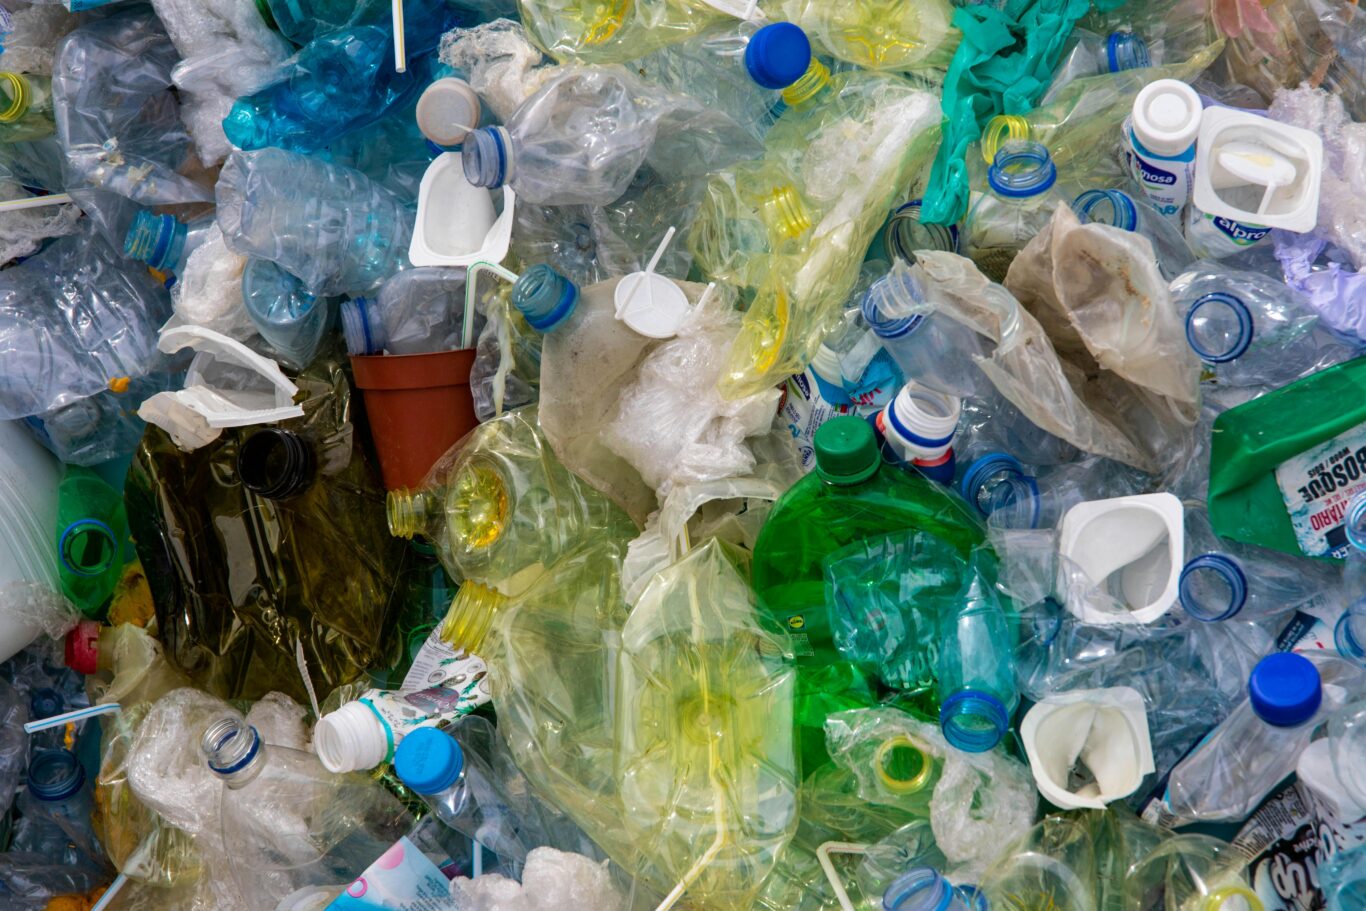 Plastic waste to turn into recycled plastic products.